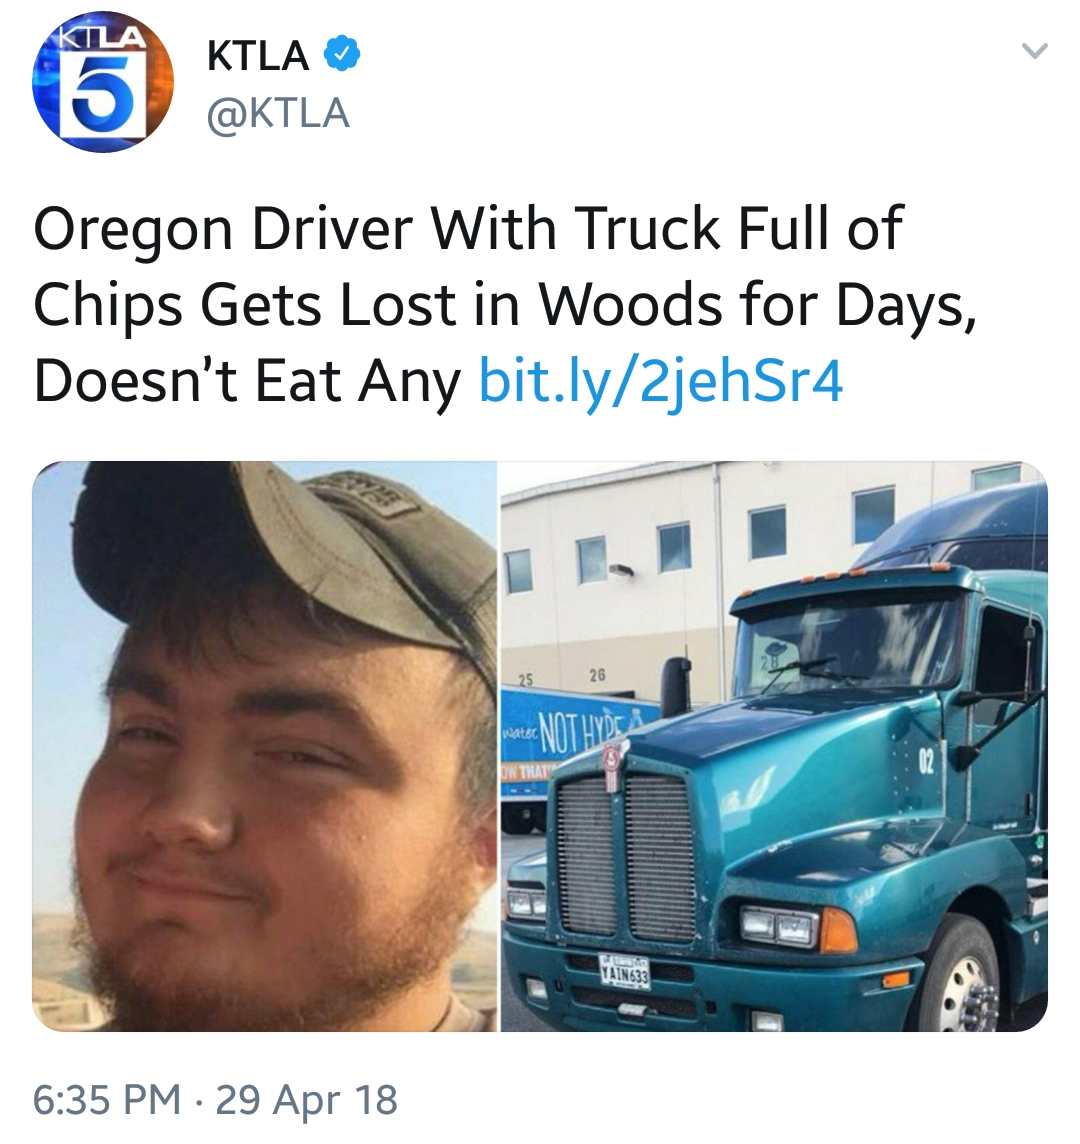 commercial vehicle - Ktla Oregon Driver With Truck Full of Chips Gets Lost in Woods for Days, Doesn't Eat Any bit.ly2jehSr4 29 Apr 18